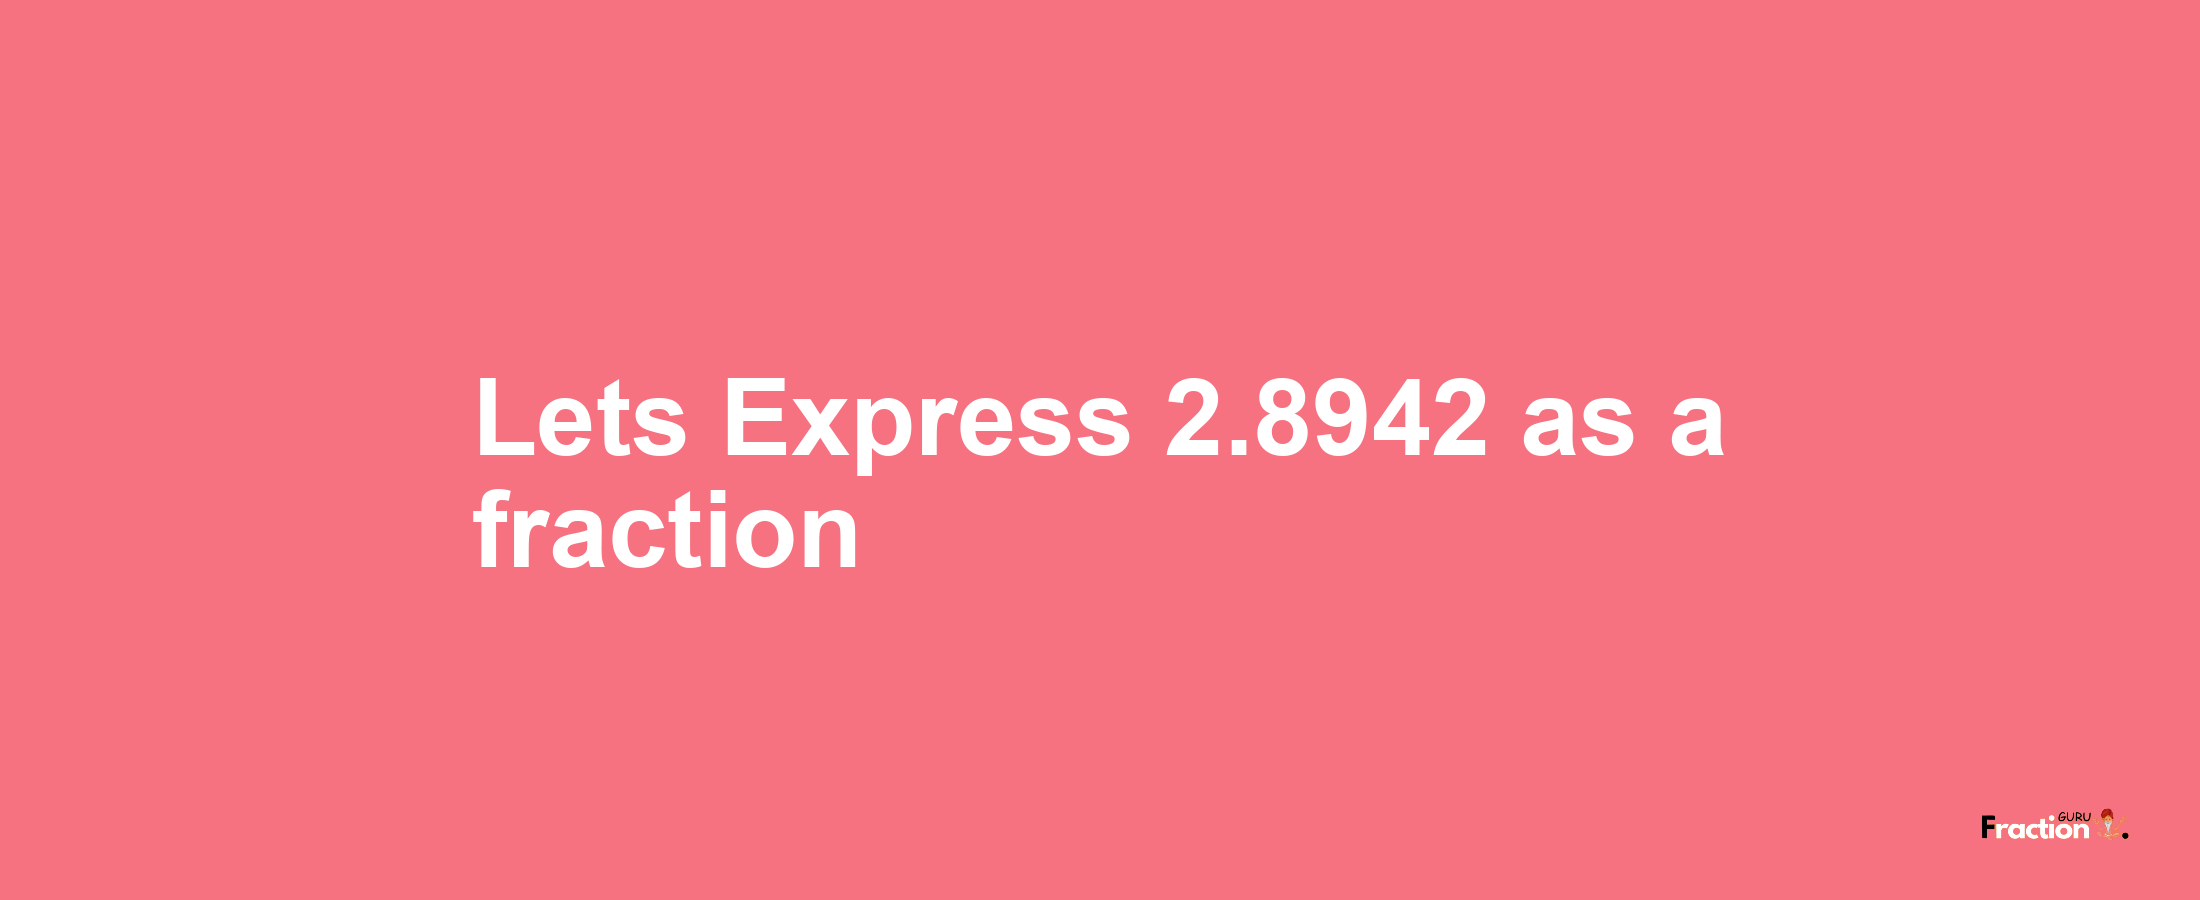 Lets Express 2.8942 as afraction